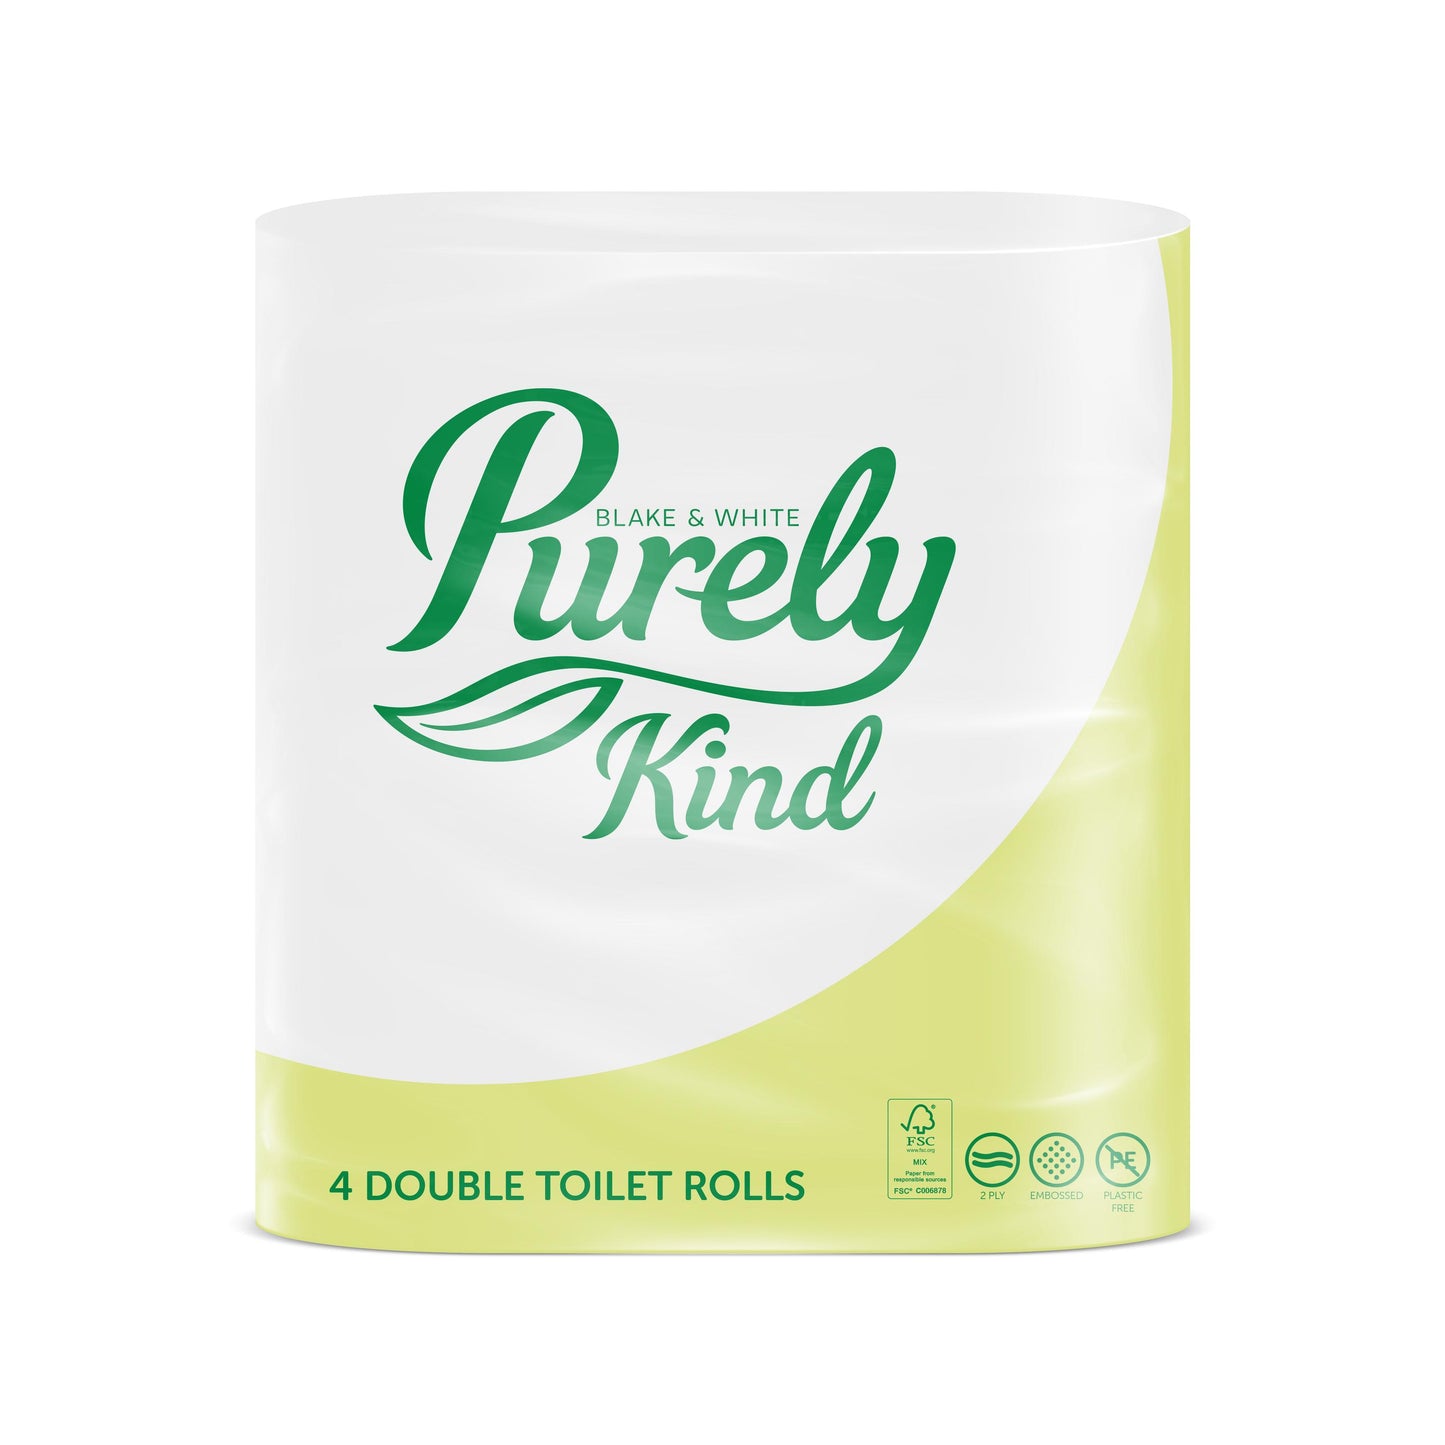 Purely Kind Toilet Roll 2ply Pack x 4 Double Rolls